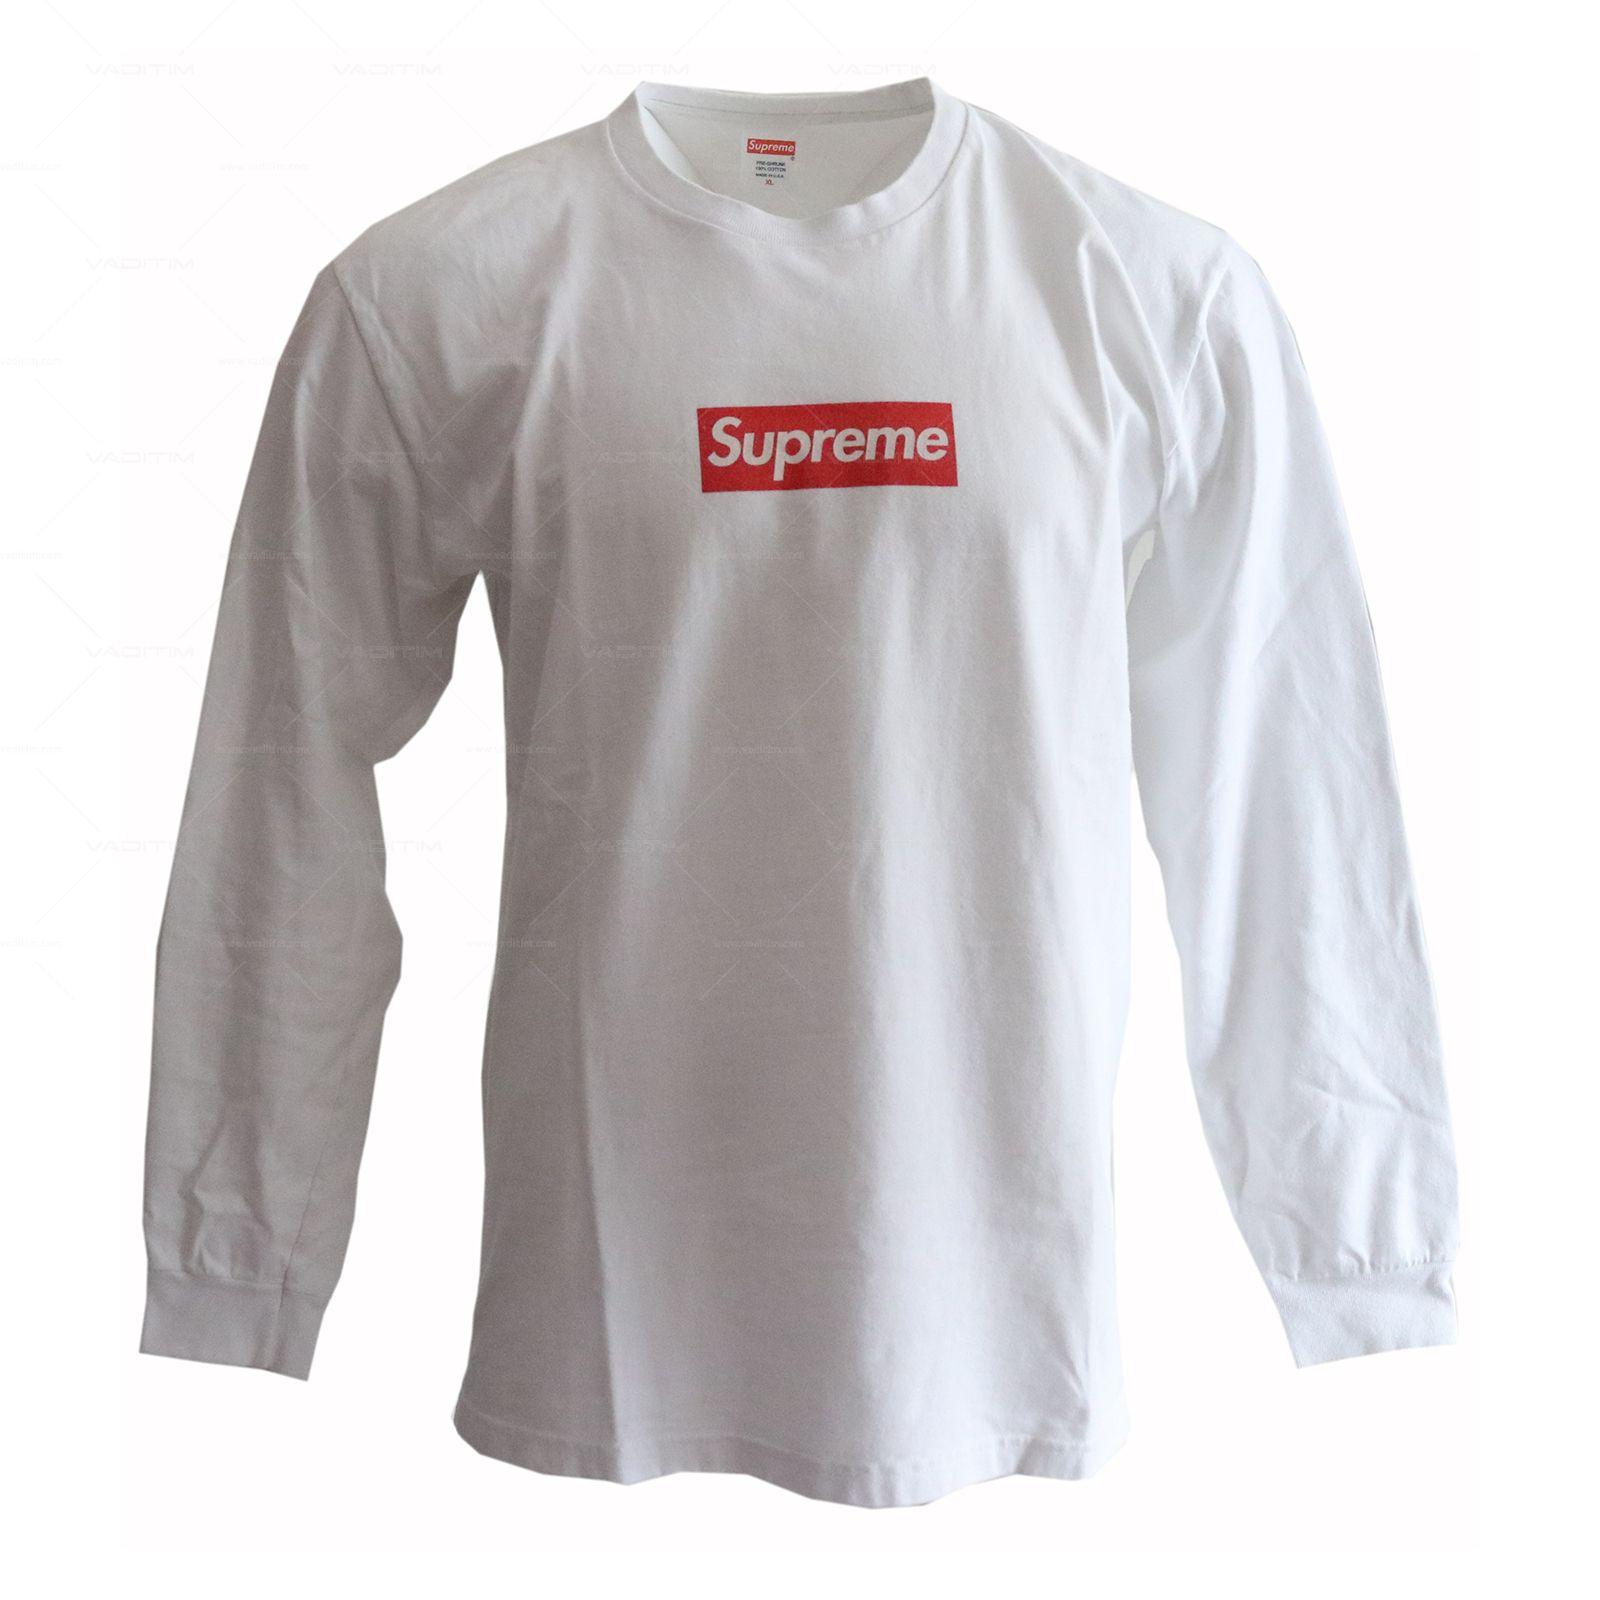 Red and White Box Logo - Red on White Box Logo F&F Longsleve - Supreme